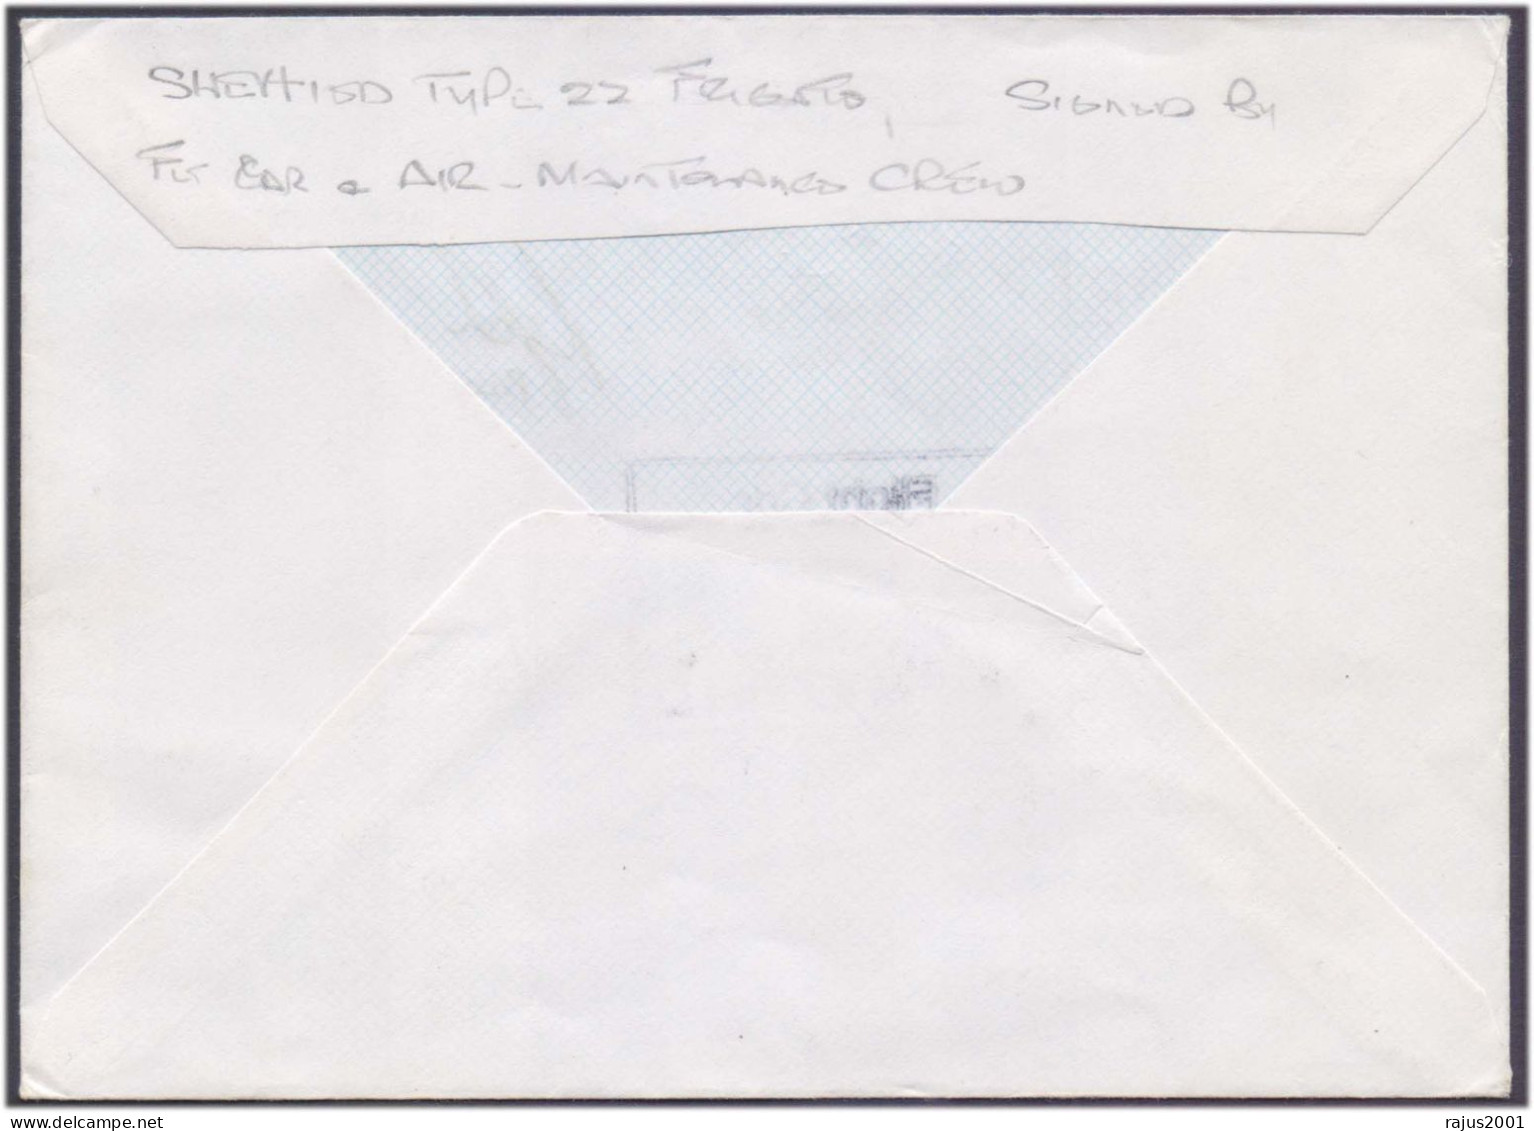 HMS SHEFFIELD Maritime Sea Mail, SIGNED BY FLIGHT SMR, FLIGHT CDR FLYING AIR MAINTENANCE, PILOT And CREW MEMBERS Cover - Maritiem